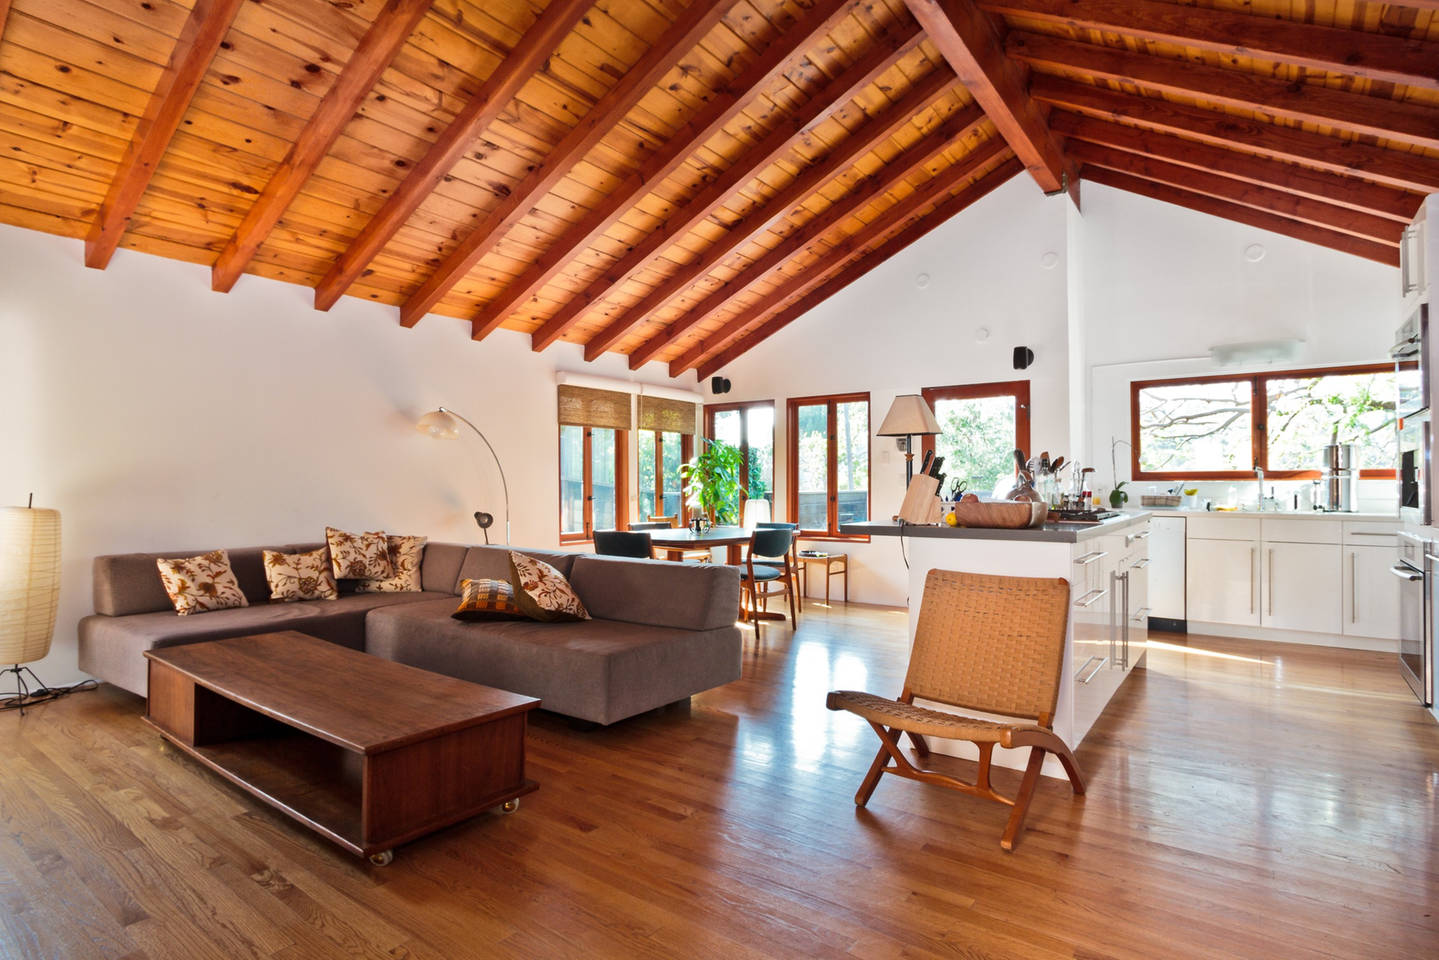 15 Luxurious L.A. Vacation Rentals